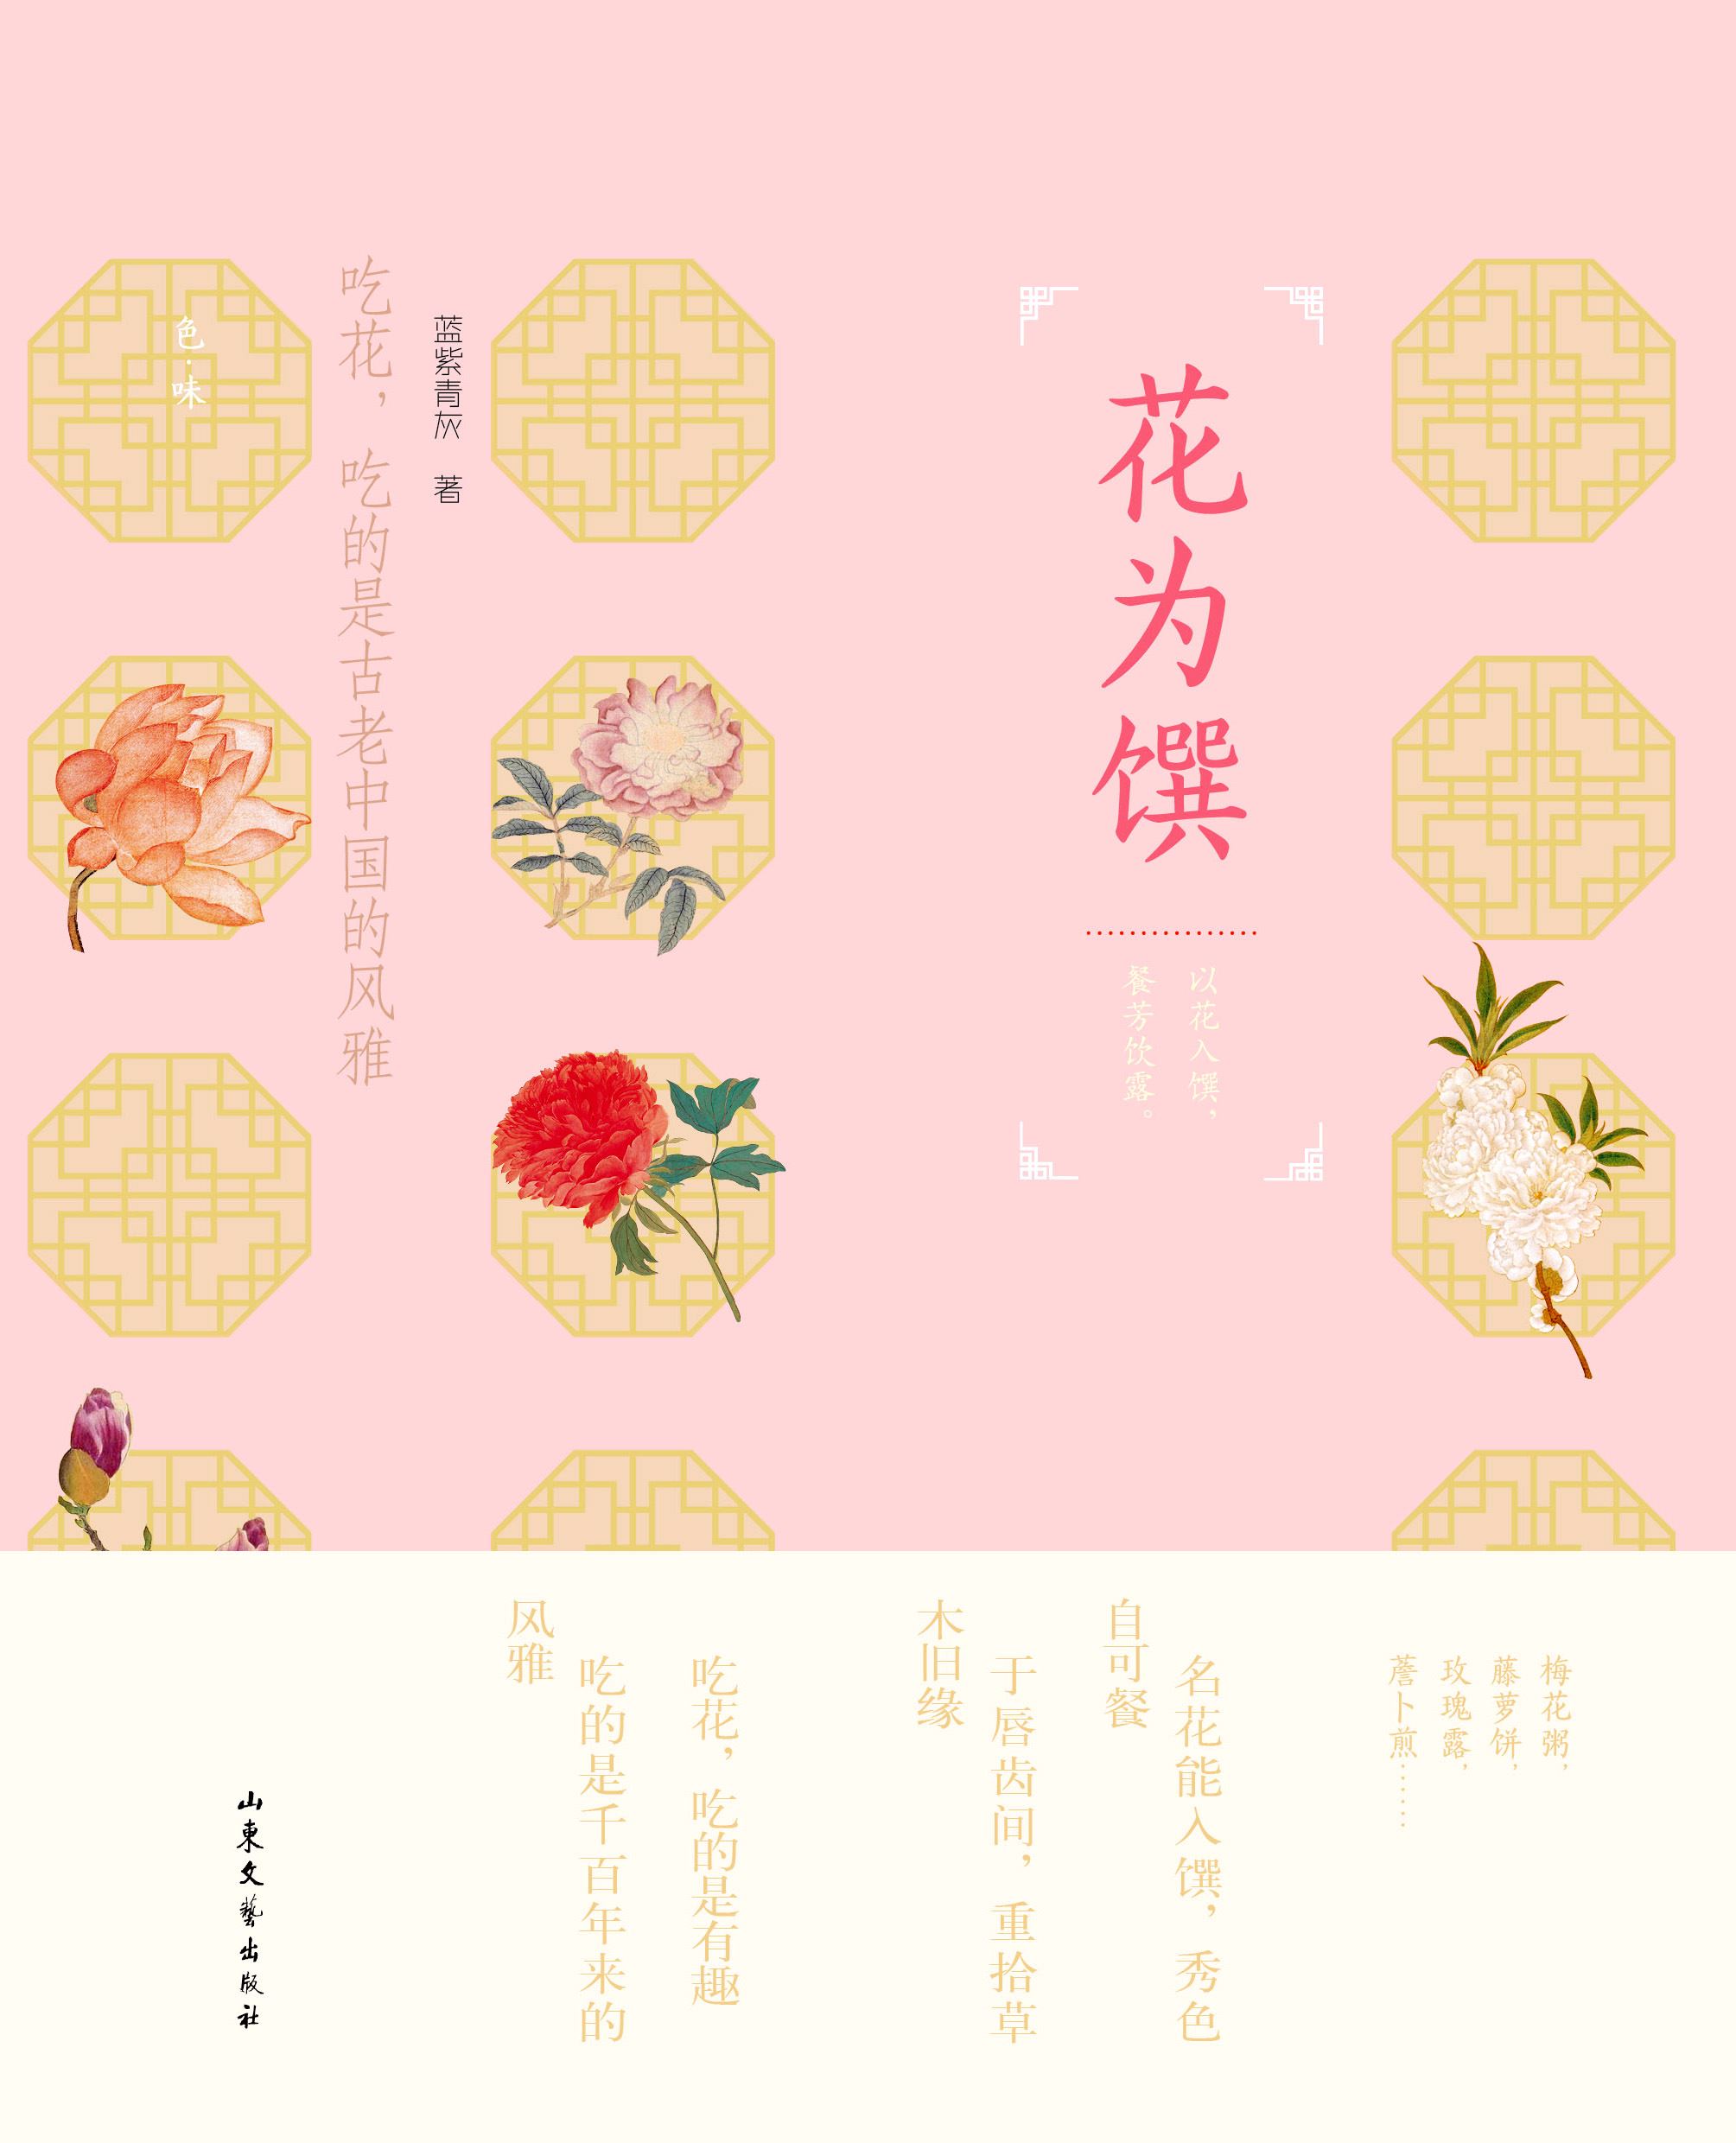 Shandong Literature and Art Publishing House Co., Ltd_How to Enjoy Chinese Delicious Food and related Essays from flower